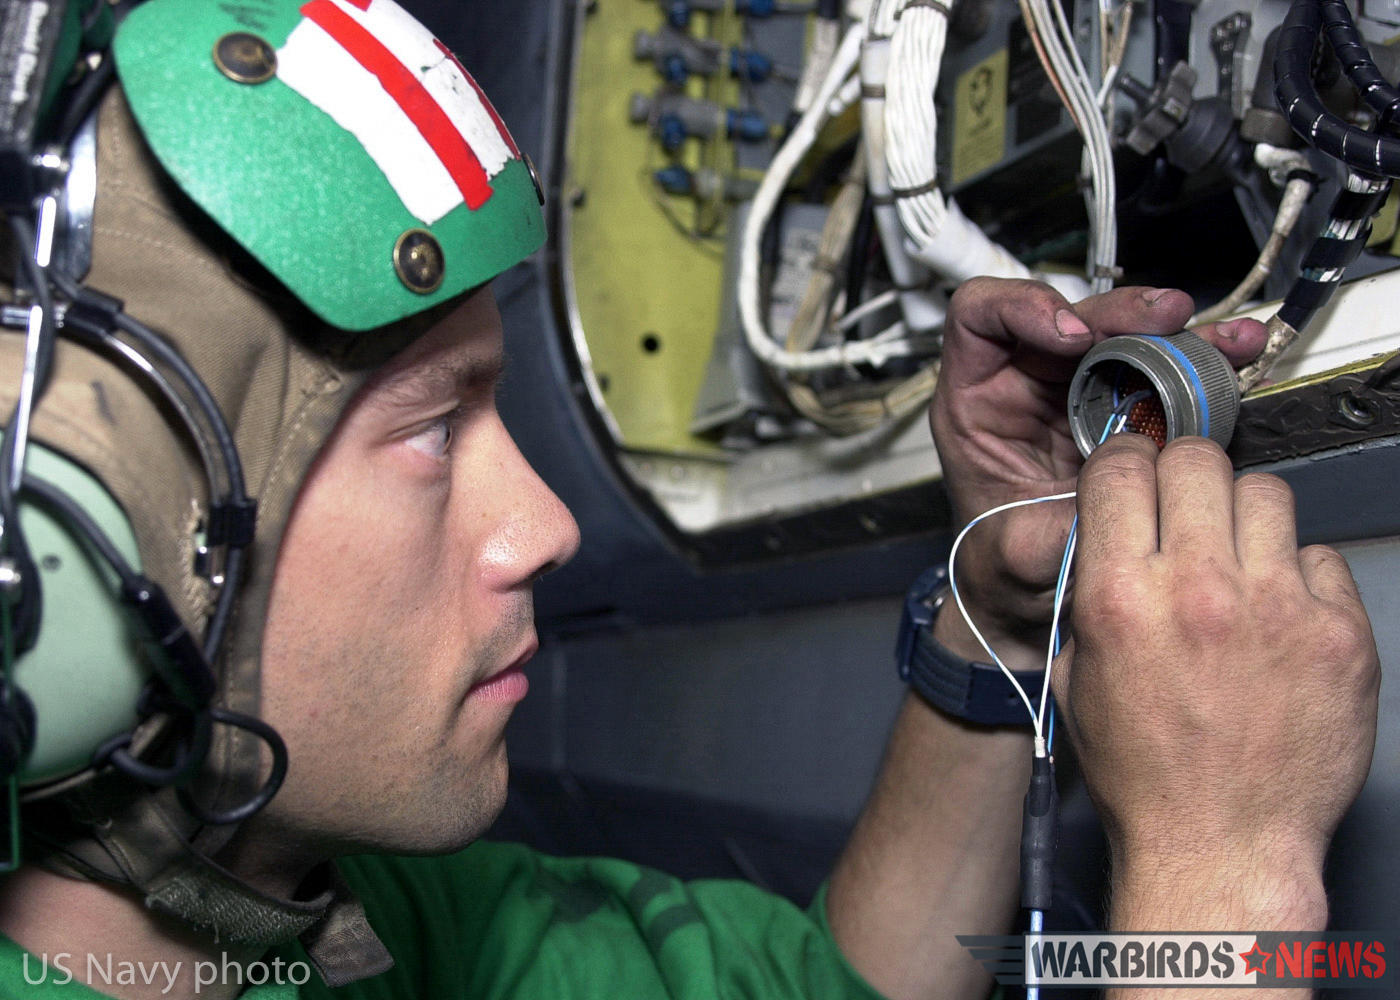 At sea aboard USS Abraham Lincoln (Oct. 18, 2002) -- Aviation Electronic's Technician 2nd Class Tony Komljenovich from Cleveland, Ohio, assigned to Fighter Squadron Thirty-One (VF-31) troubleshoots the wires on a cannon plug of an F-14D “Tomcat.” This maintenance is performed to ensure that the APG-71 radar system aboard the aircraft is working properly. The APG-71 radar is a digital processing system that gives the F-14D improved detection and tracking range. It features a low-sidelobe antenna, a sidelobe-blanking guard channel, and monopulse angle tracking, all of which are intended to make the radar less vulnerable to jamming. Lincoln and her embarked Carrier Air Wing Fourteen (CVW-14) are on a scheduled six month deployment conducting combat missions in support of Operation Enduring Freedom. U.S. Navy photo by Photographer's Mate 2nd Class Virginia K. Schaefer. (RELEASED)